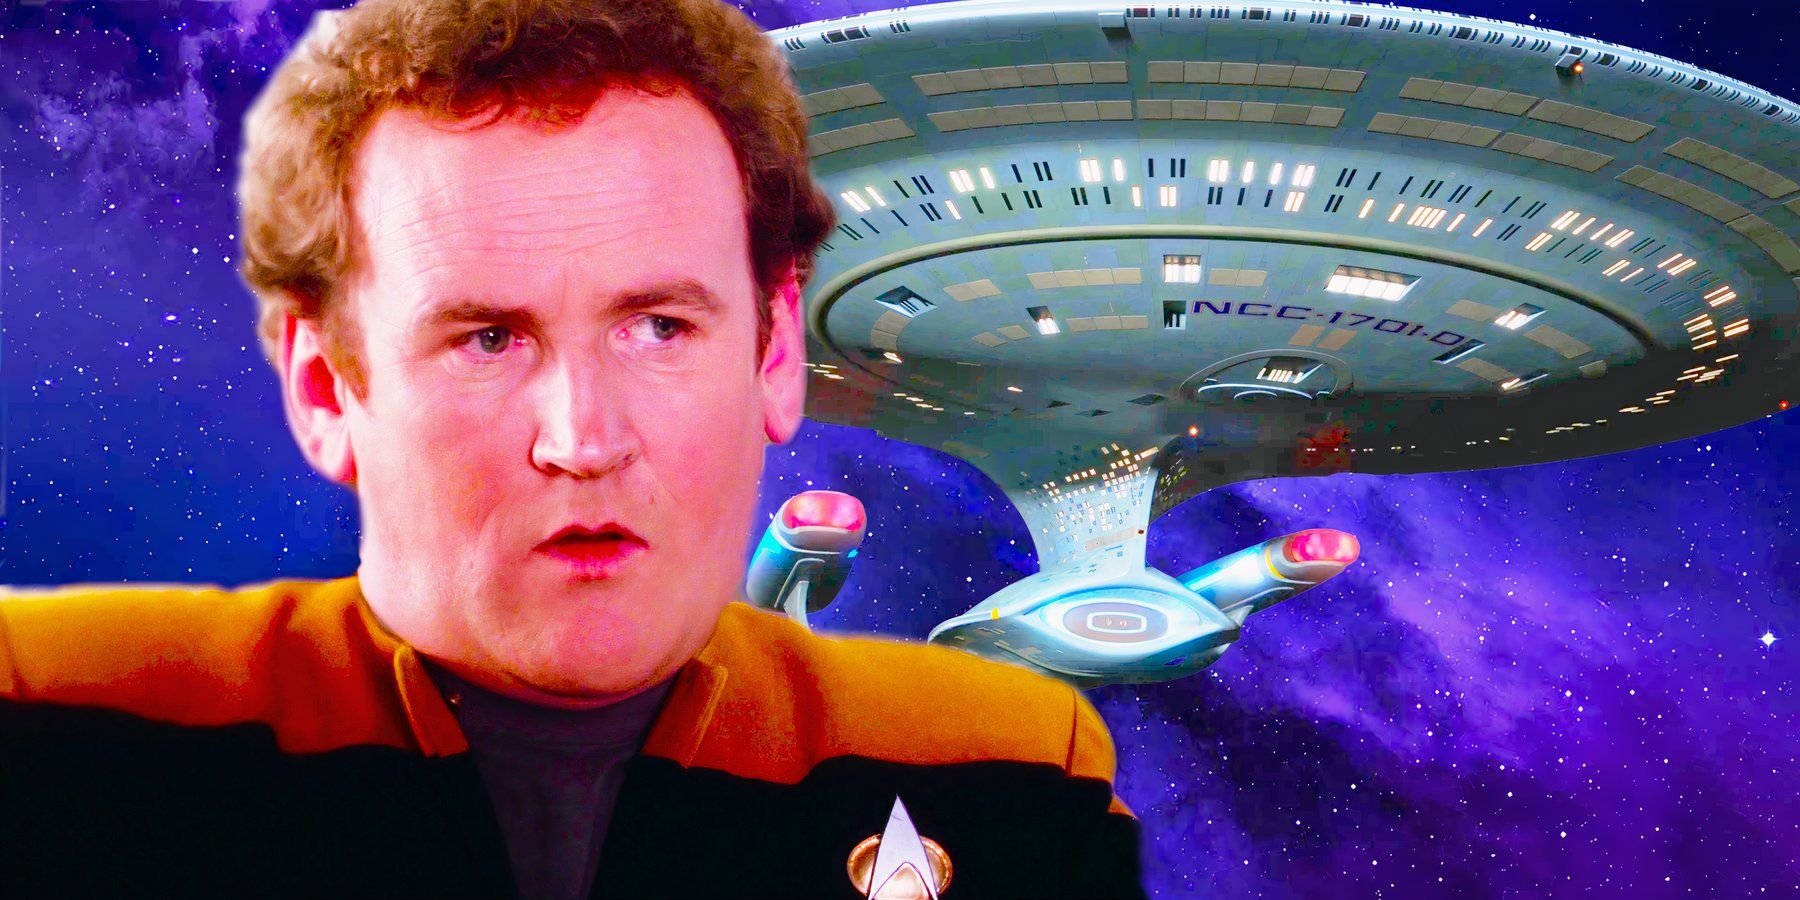 Chief Miles O'Brien in Star Trek: DS9 and the USS Enterprise-D from Star Trek: The Next Generation